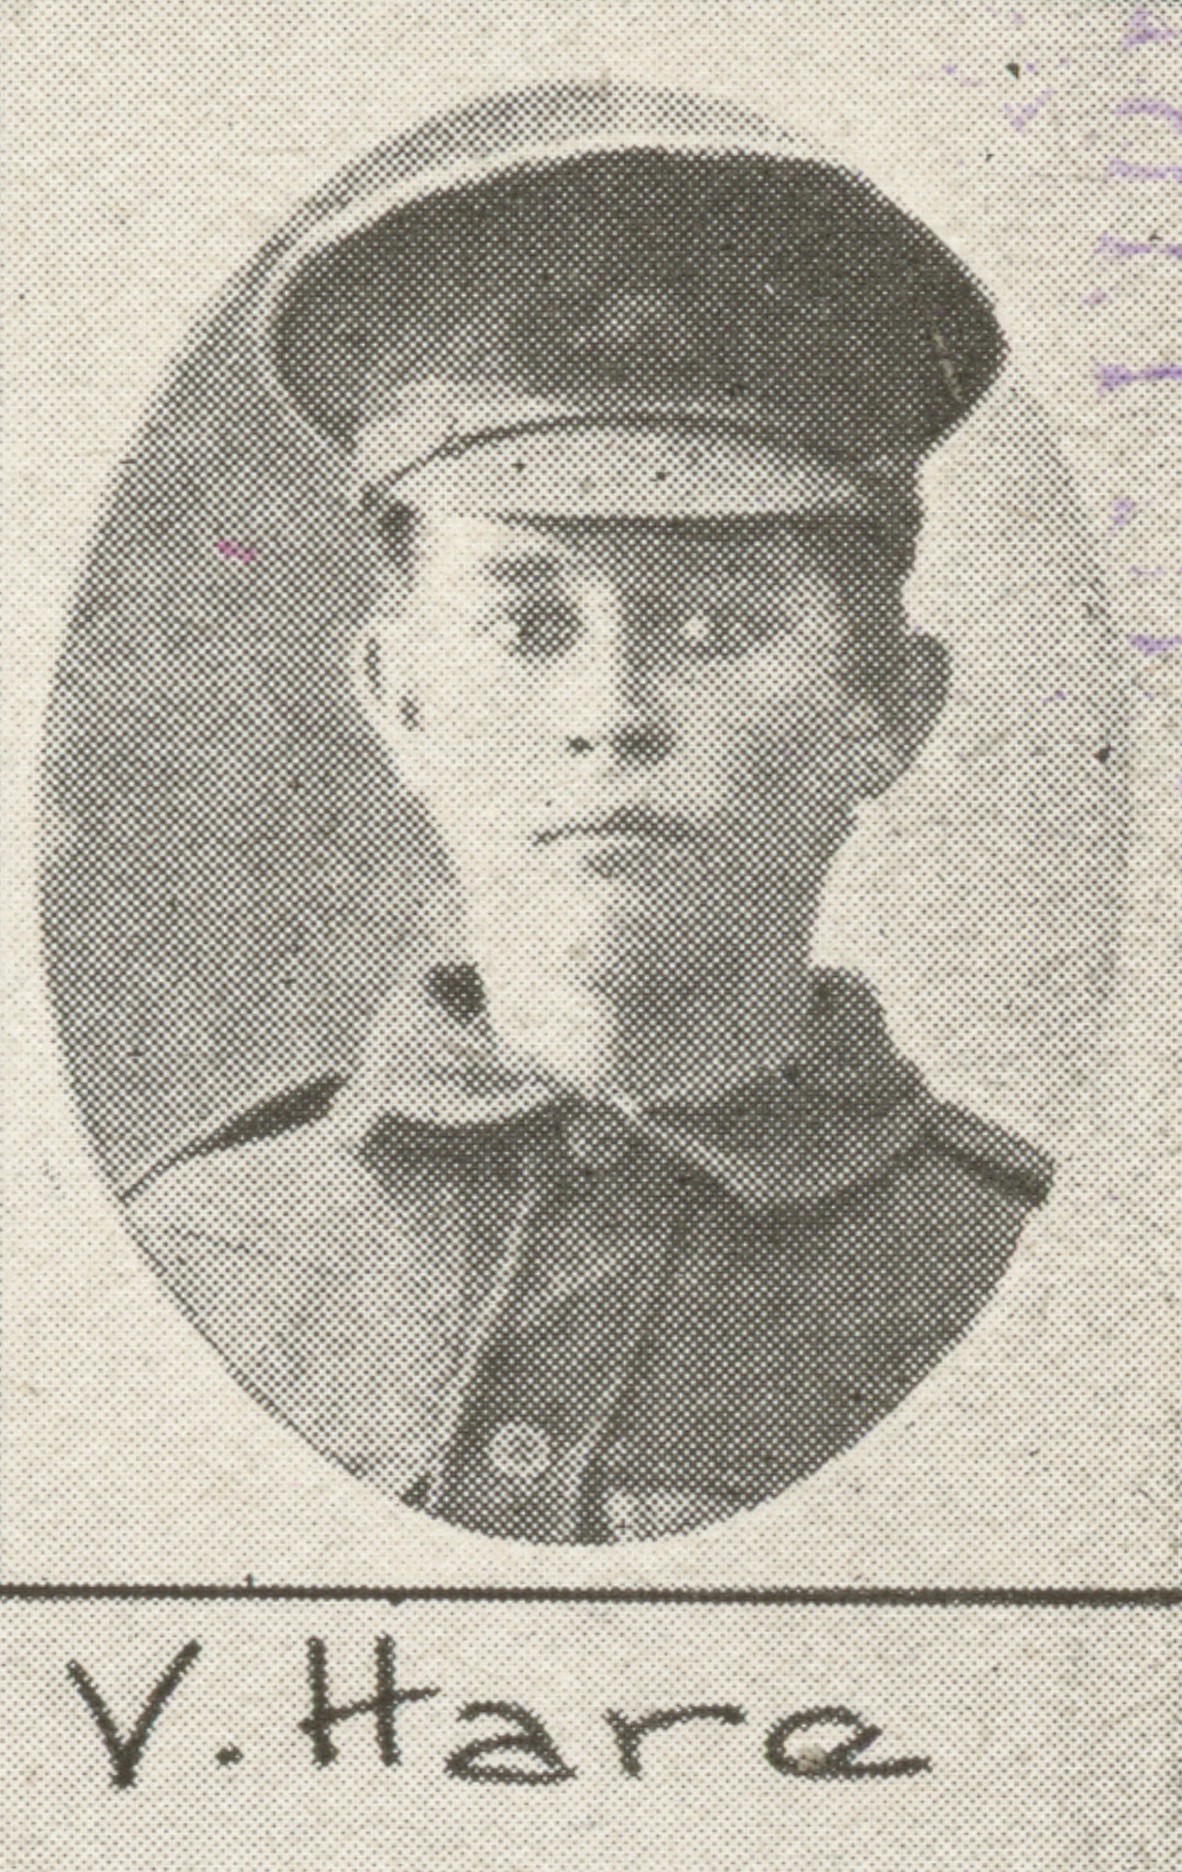 V Hare one of the soldiers photographed in The Queenslander Pictorial supplement to The Queenslander 1917